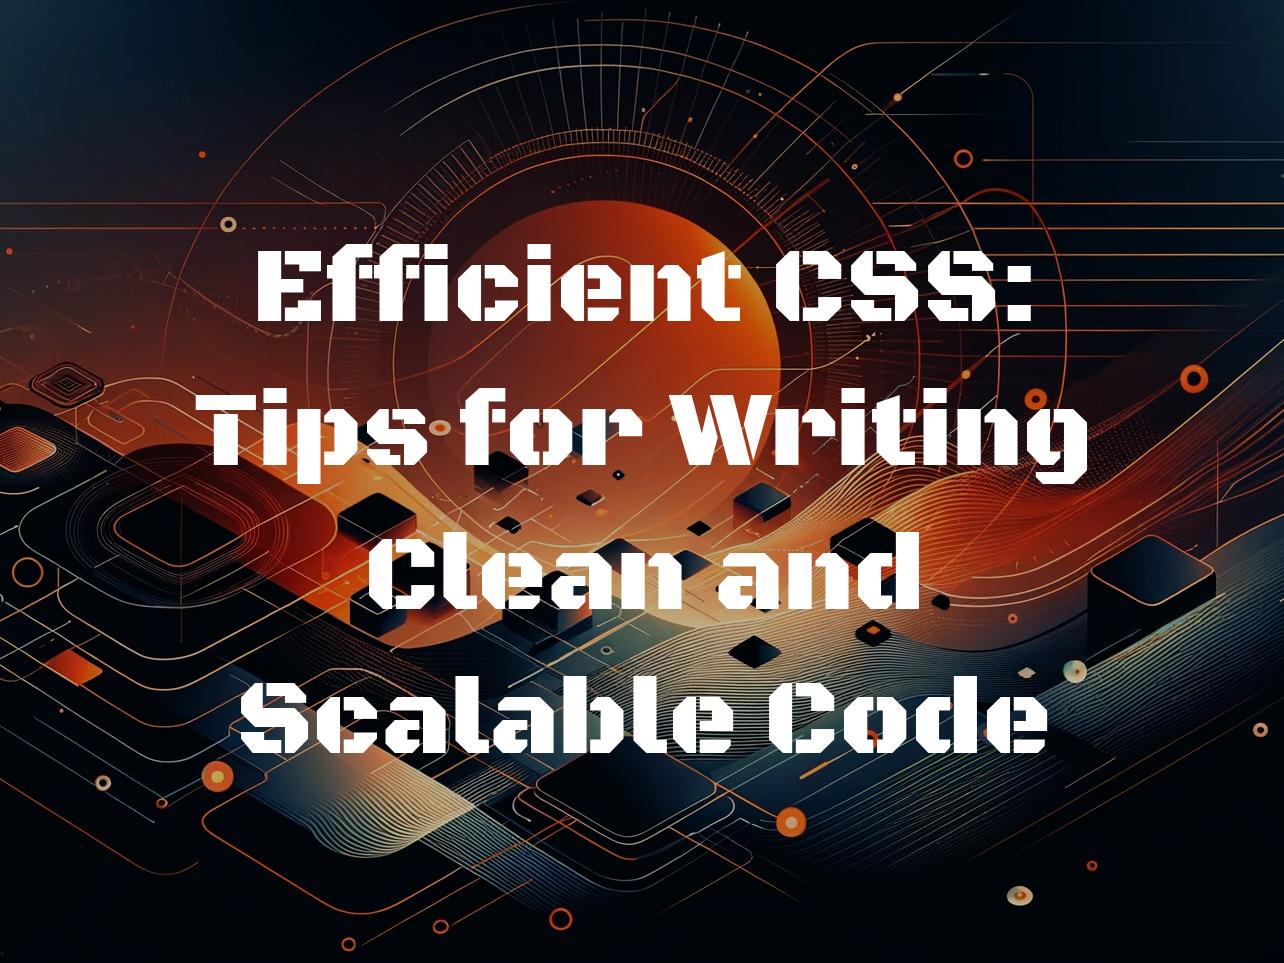 Efficient CSS: Tips for Writing Clean and Scalable Code